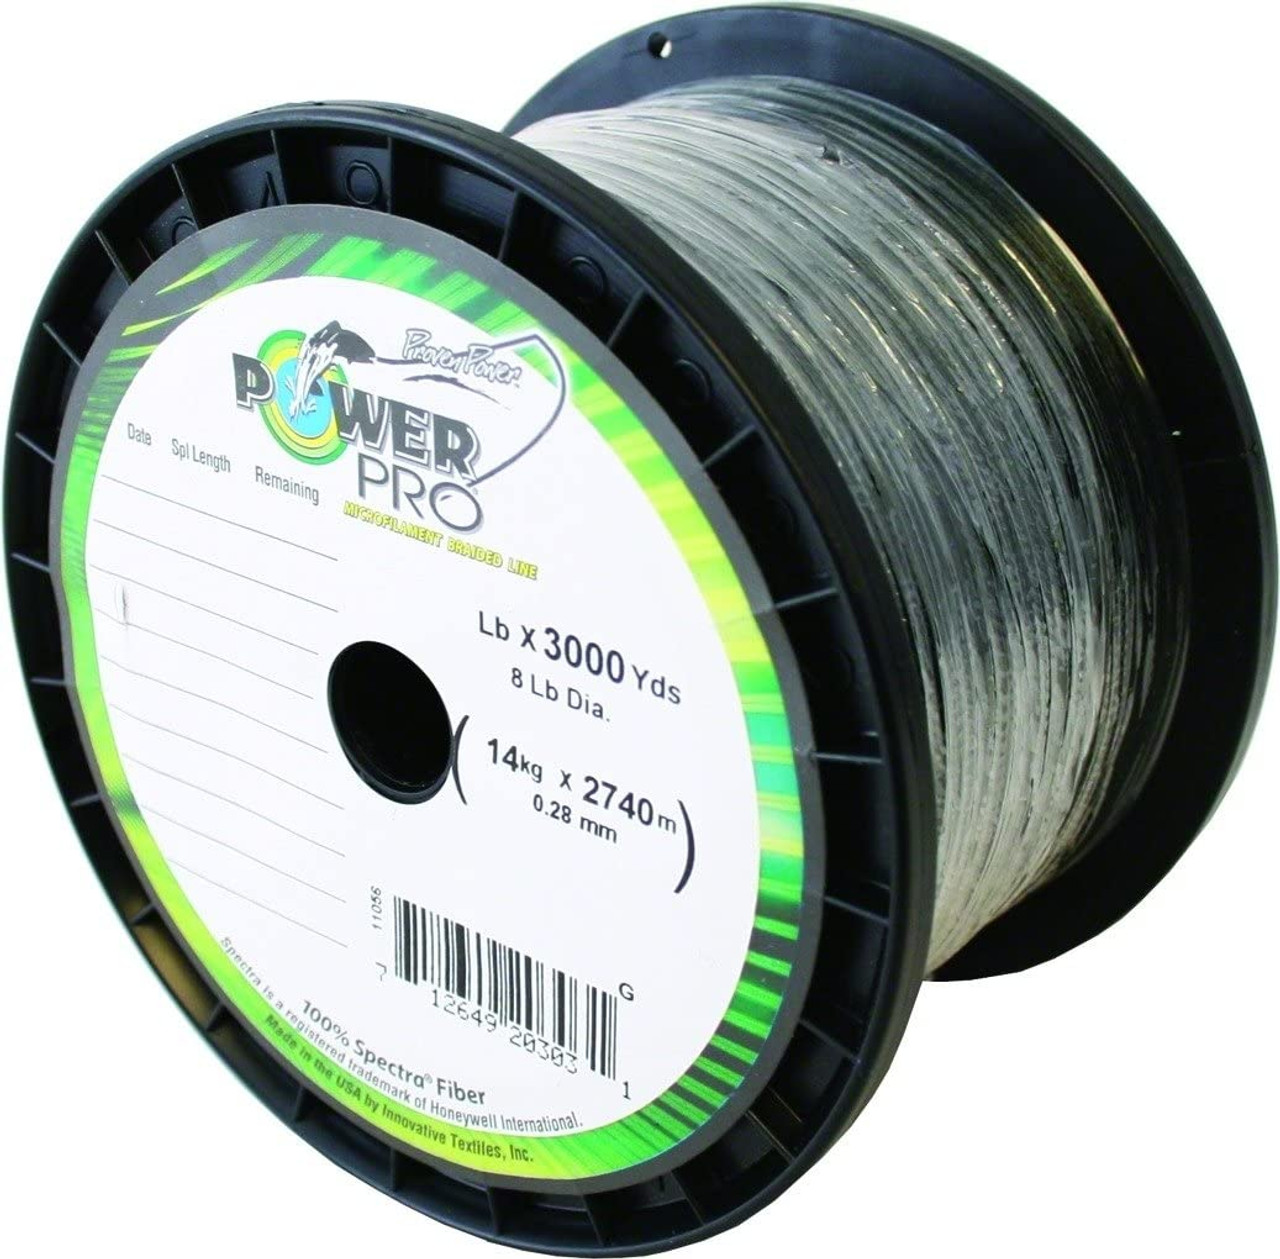 Power Pro Braided Line 80# Moss Green 3000 Yards PP3000-80G